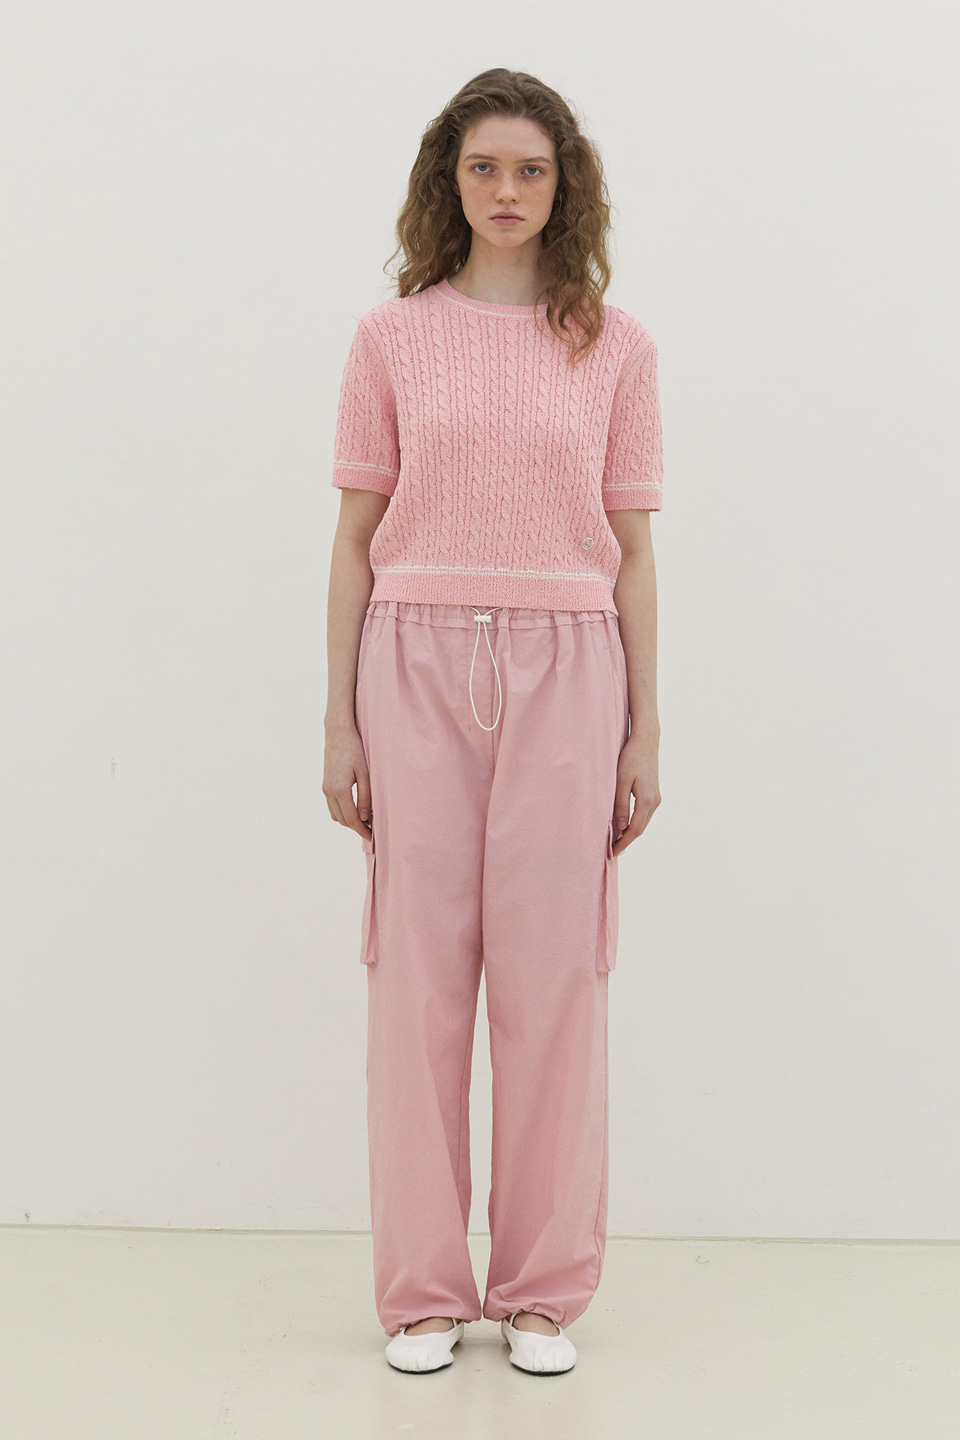 Cable Puff Sleeve Knit_LIGHT PINK